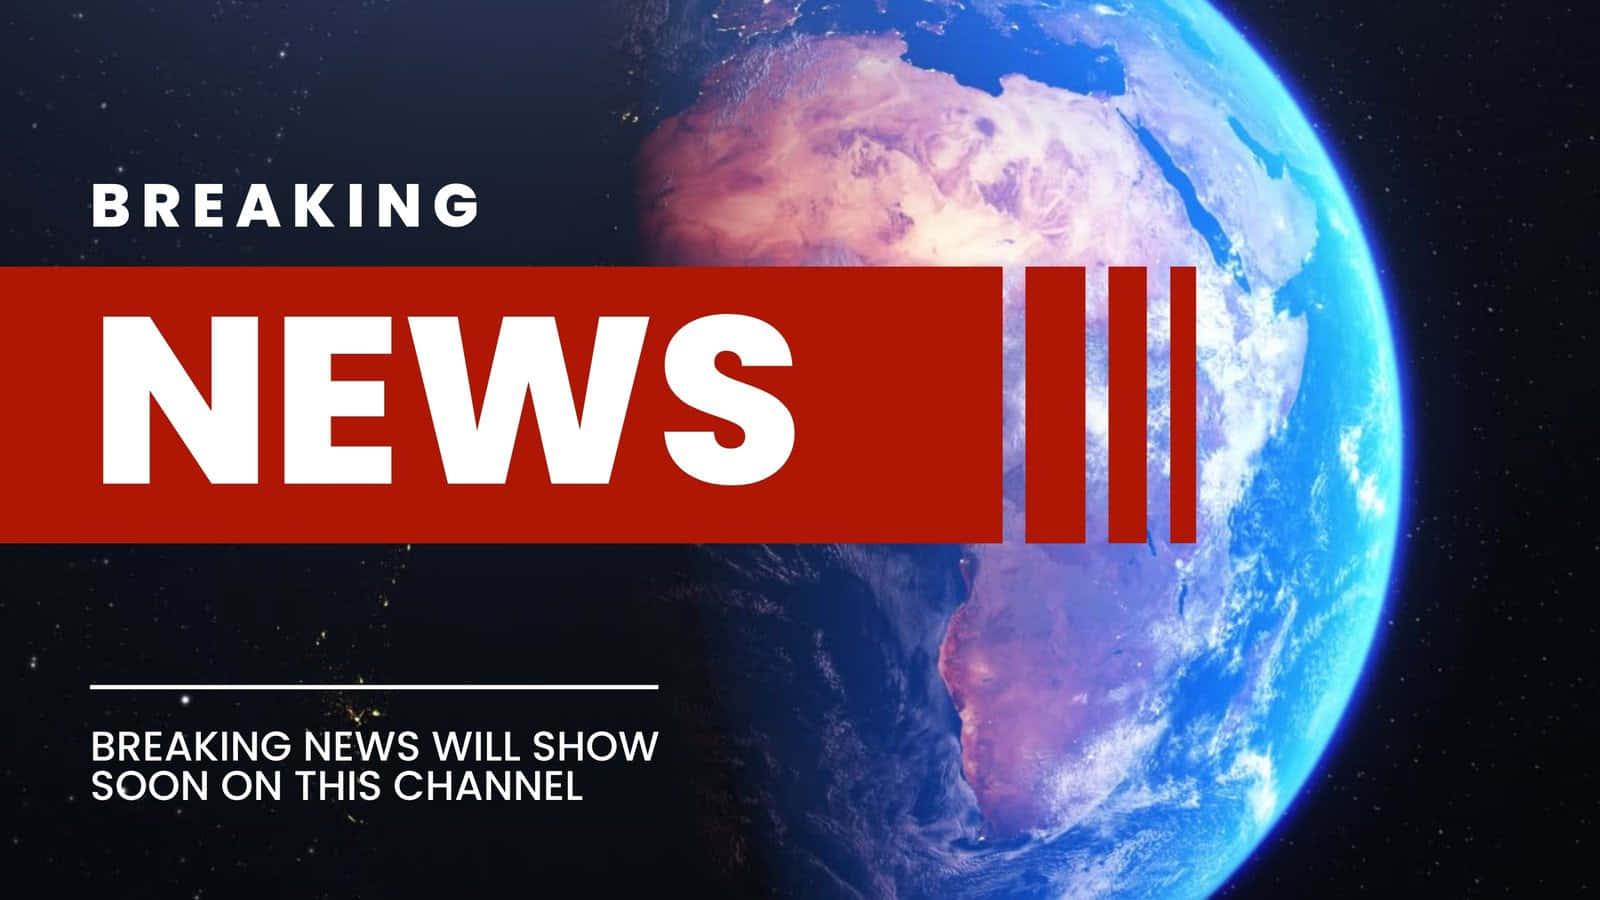 Showing Breaking News Background 1600 x 900 Background